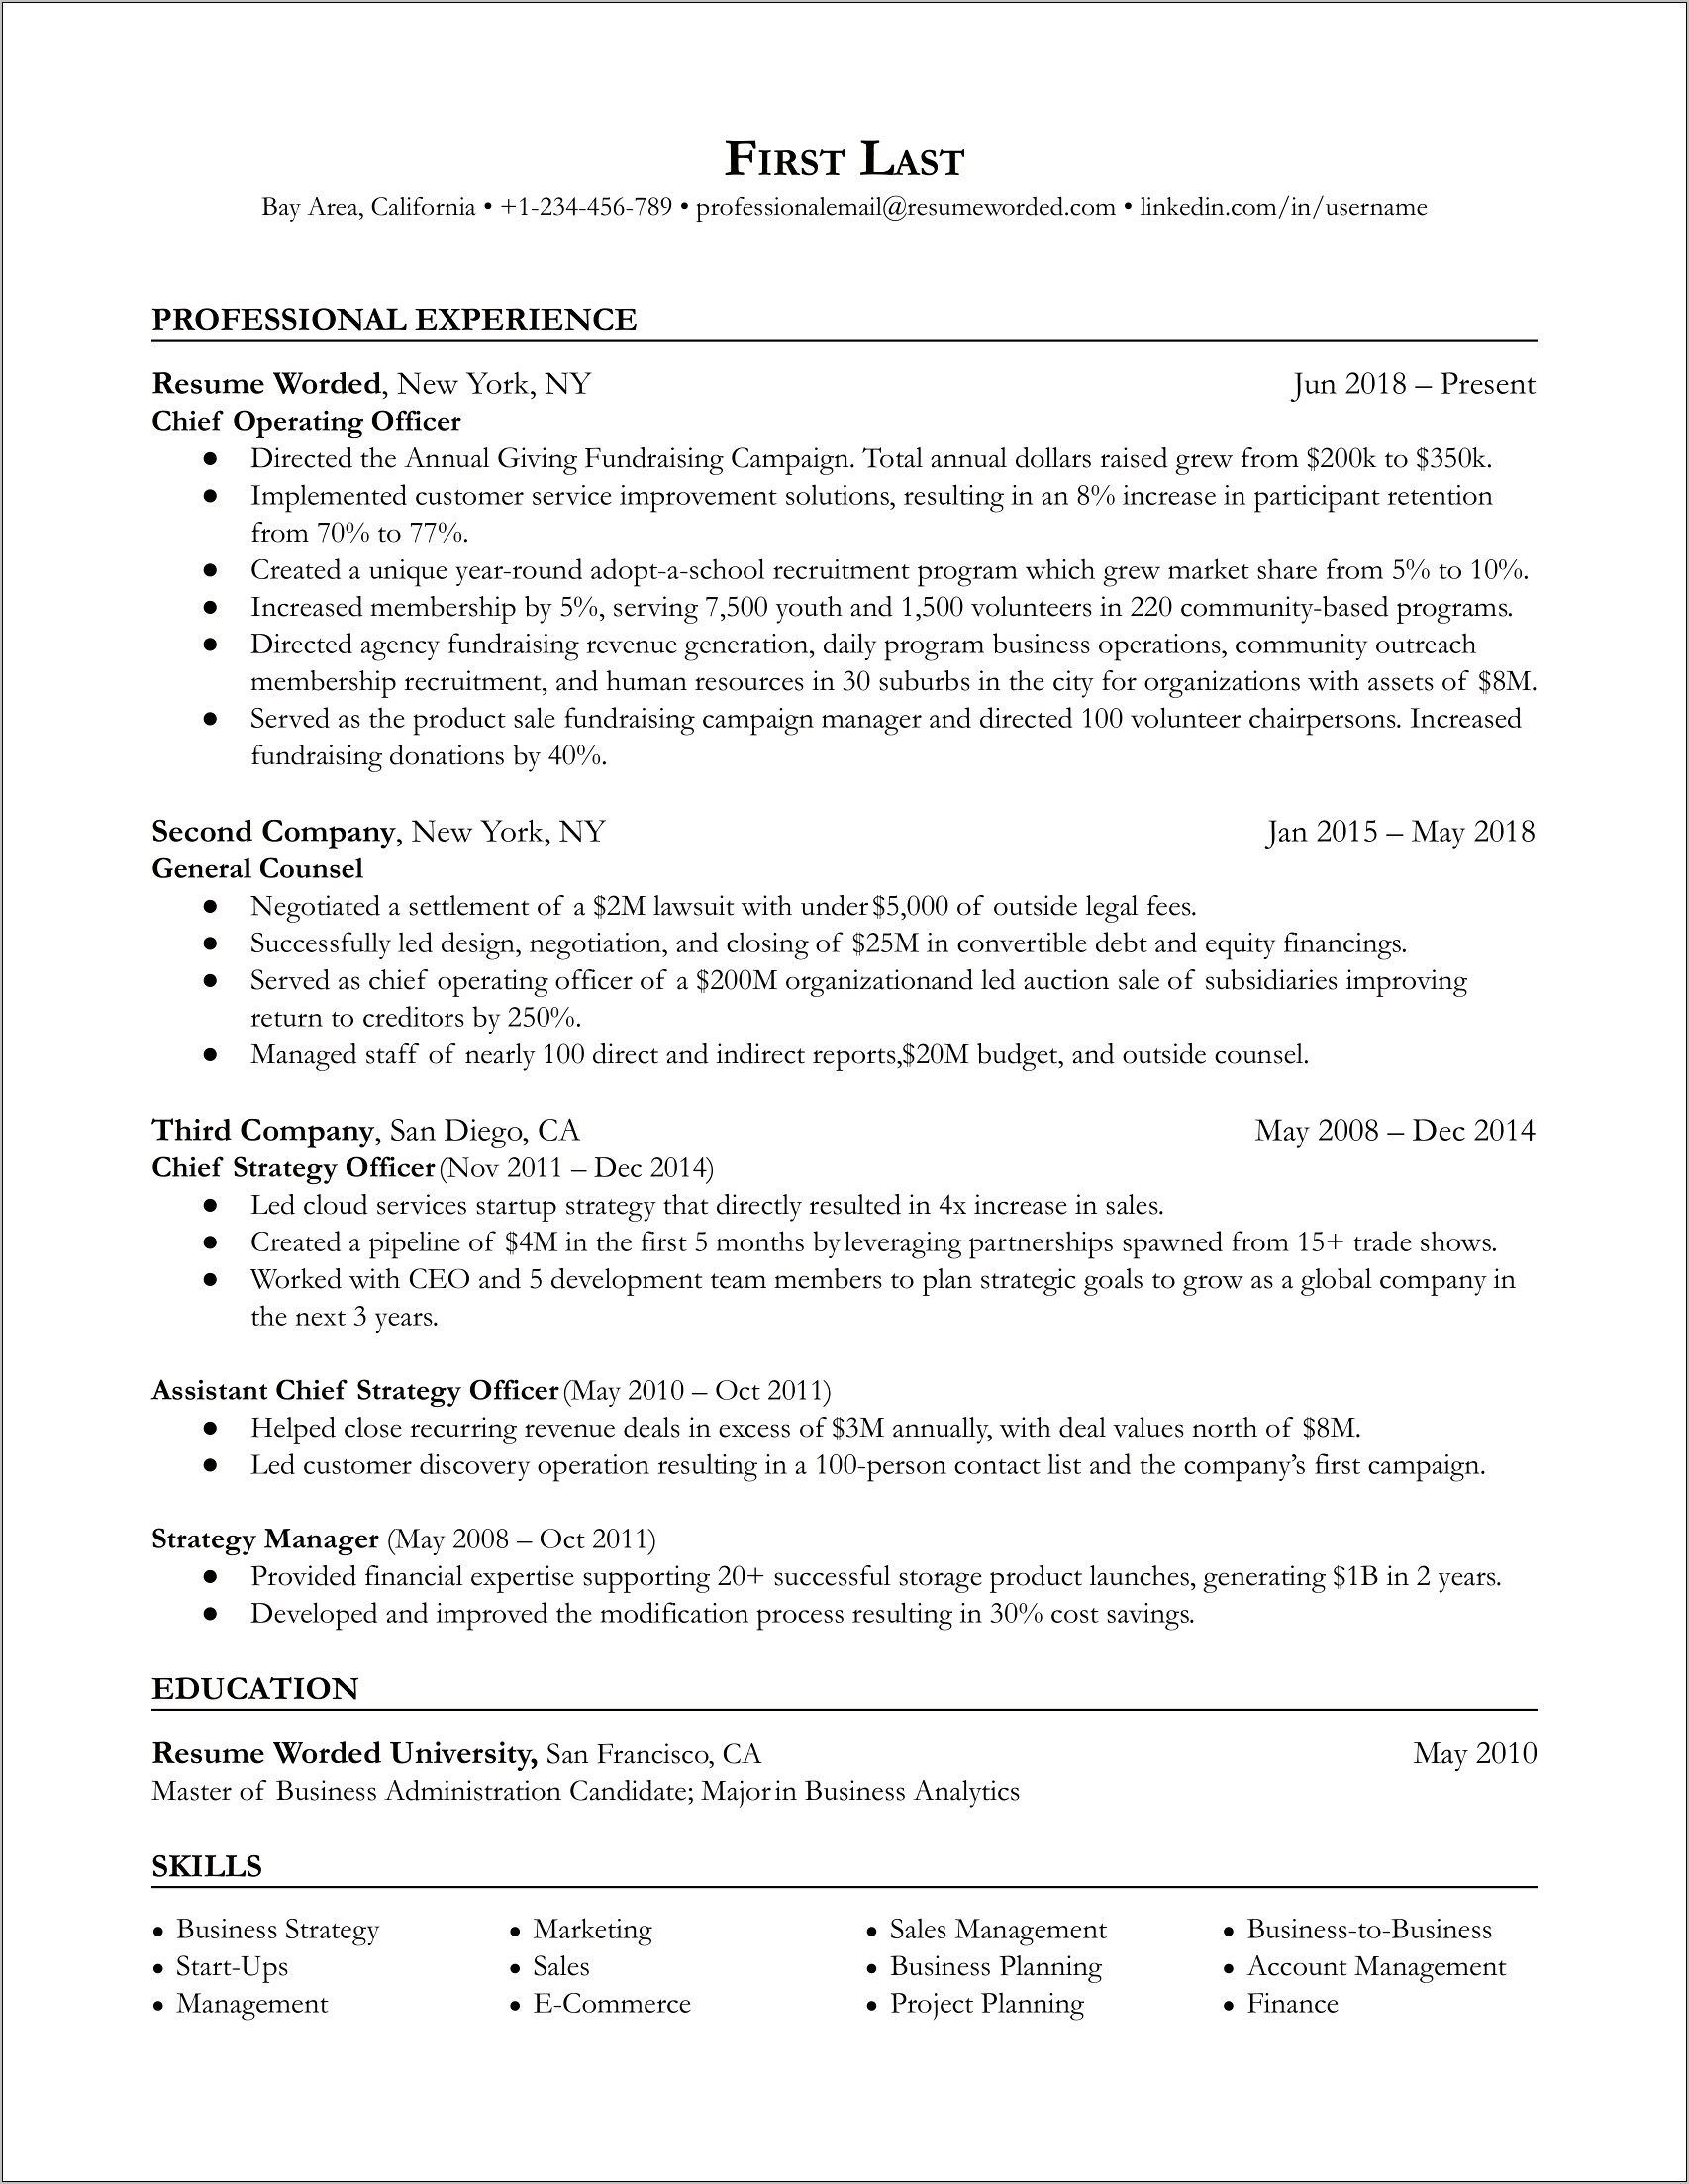 Resume Work Multiple Roles One Company